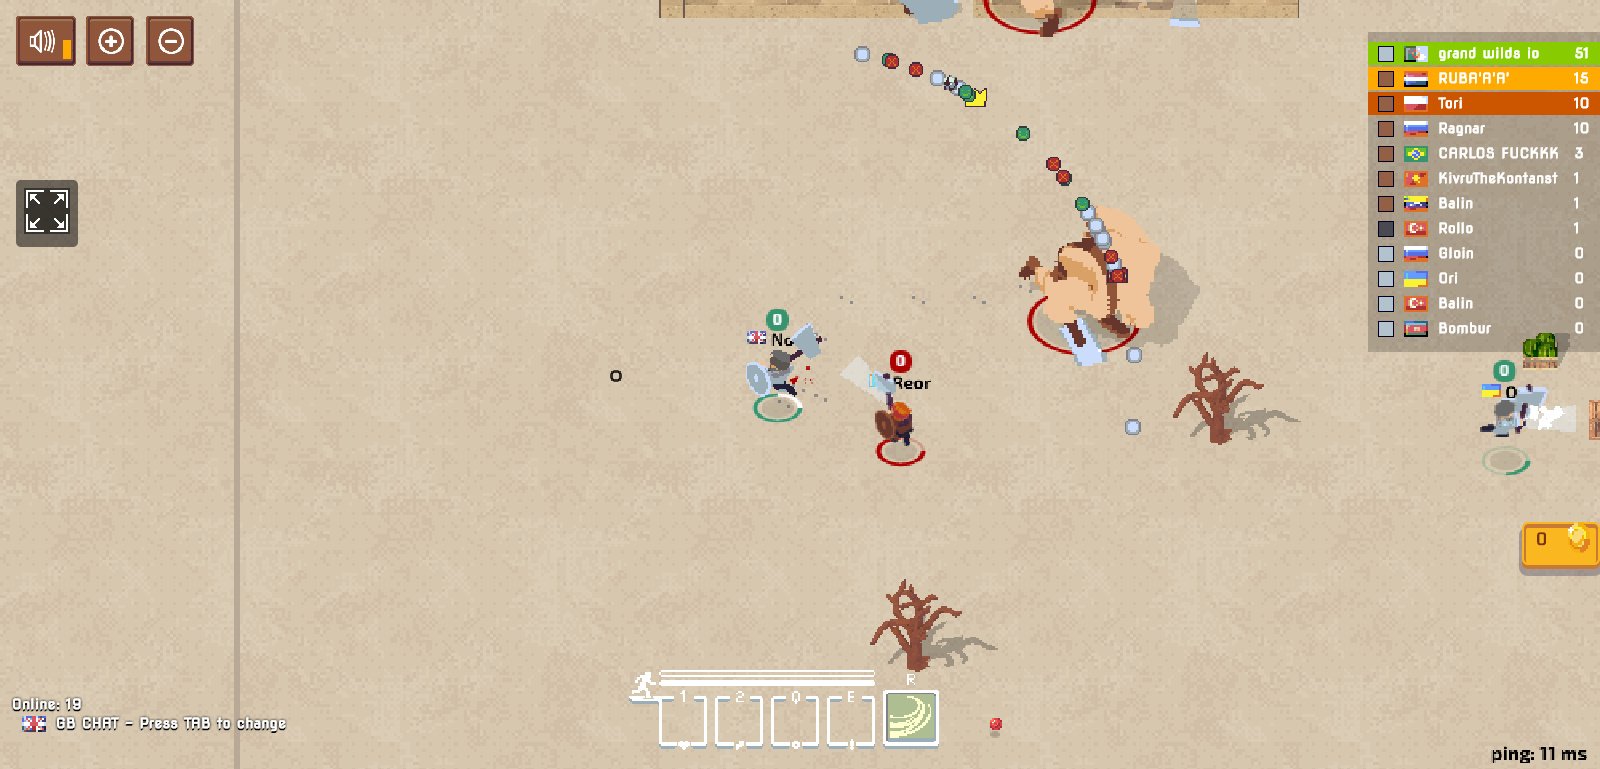 Best Browser Games: Wilds.io - isometric view of a fantasy battle